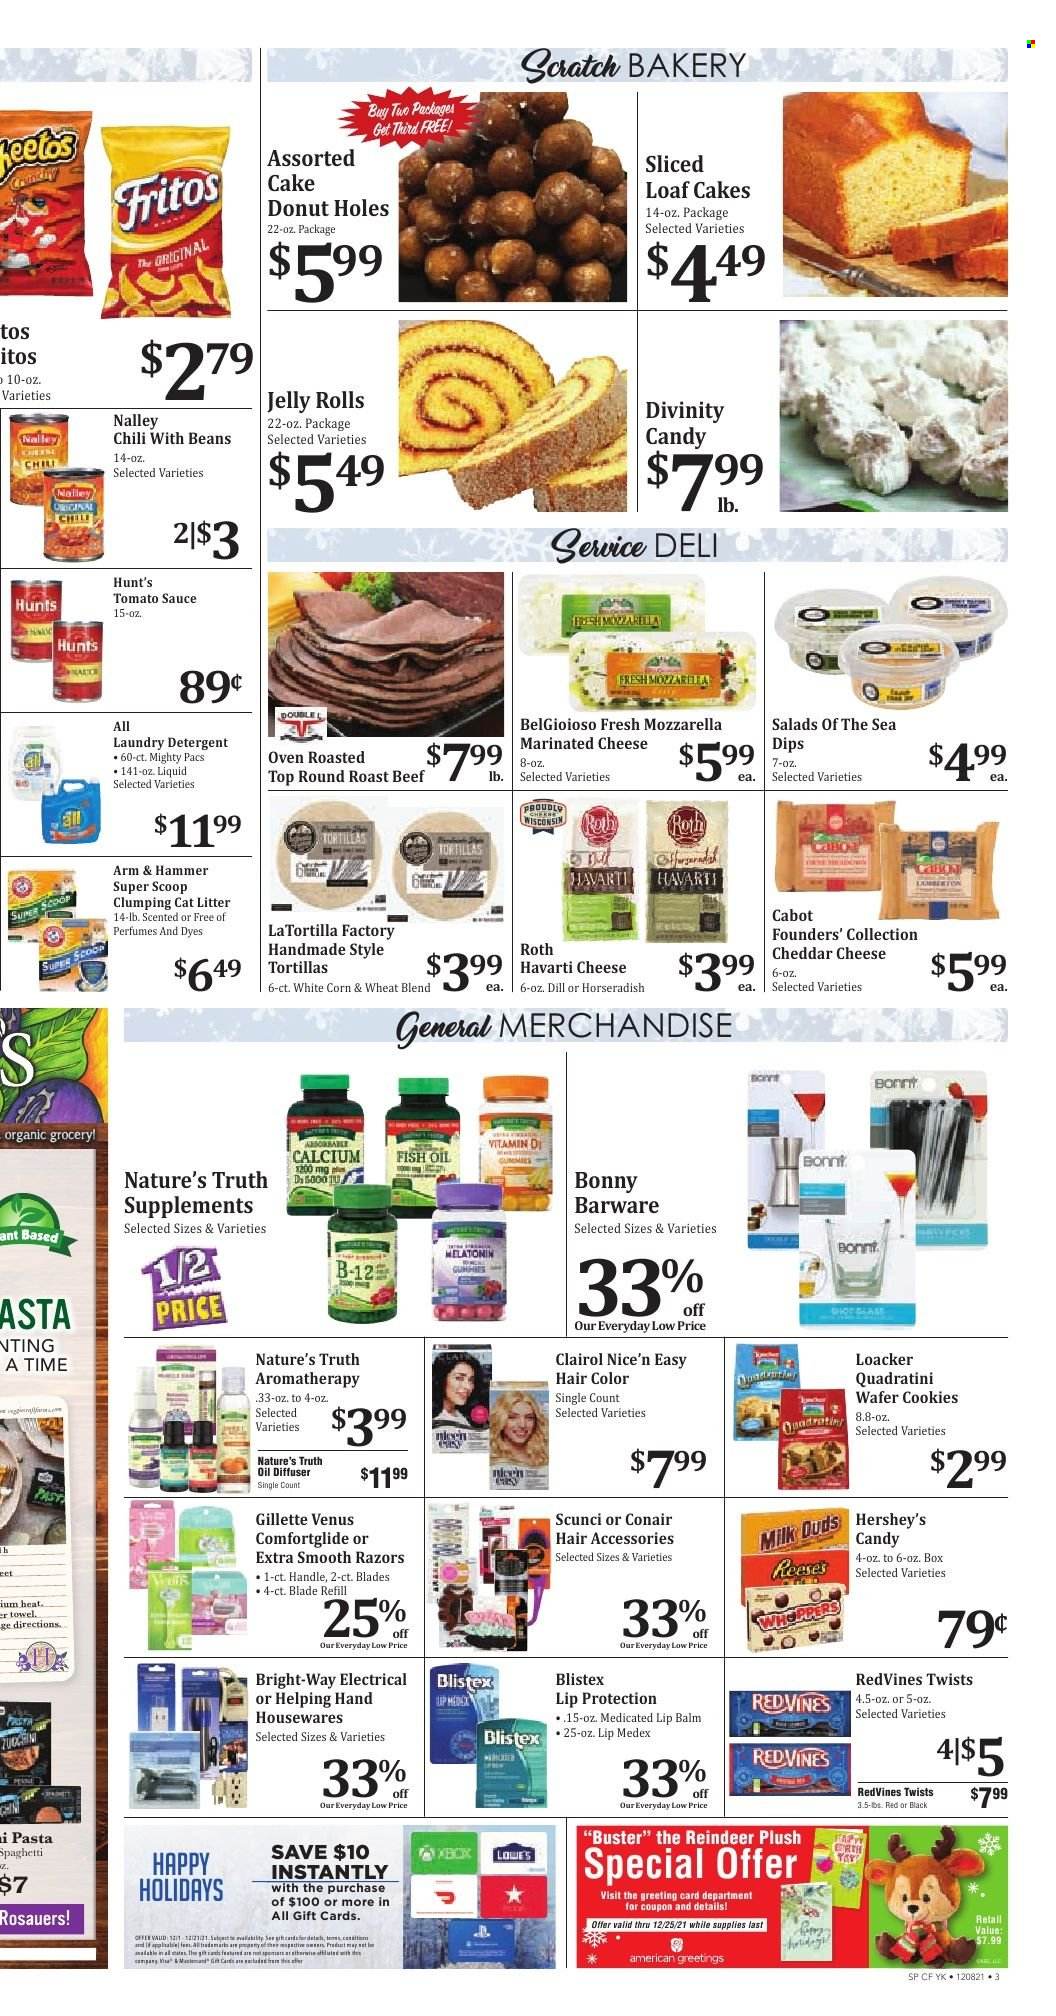 thumbnail - Rosauers Flyer - 12/08/2021 - 12/14/2021 - Sales products - tortillas, cake, donut holes, corn, horseradish, spaghetti, pasta, sauce, mozzarella, Havarti, cheddar, cheese, Reese's, Hershey's, cookies, wafers, Milk Duds, jelly, Fritos, ARM & HAMMER, tomato sauce, dill, oil, beef meat, round roast, roast beef, detergent, laundry detergent, lip balm, Clairol, hair color, Scünci, Gillette, Venus, cat litter, calcium, fish oil, Melatonin, Nature's Truth. Page 3.